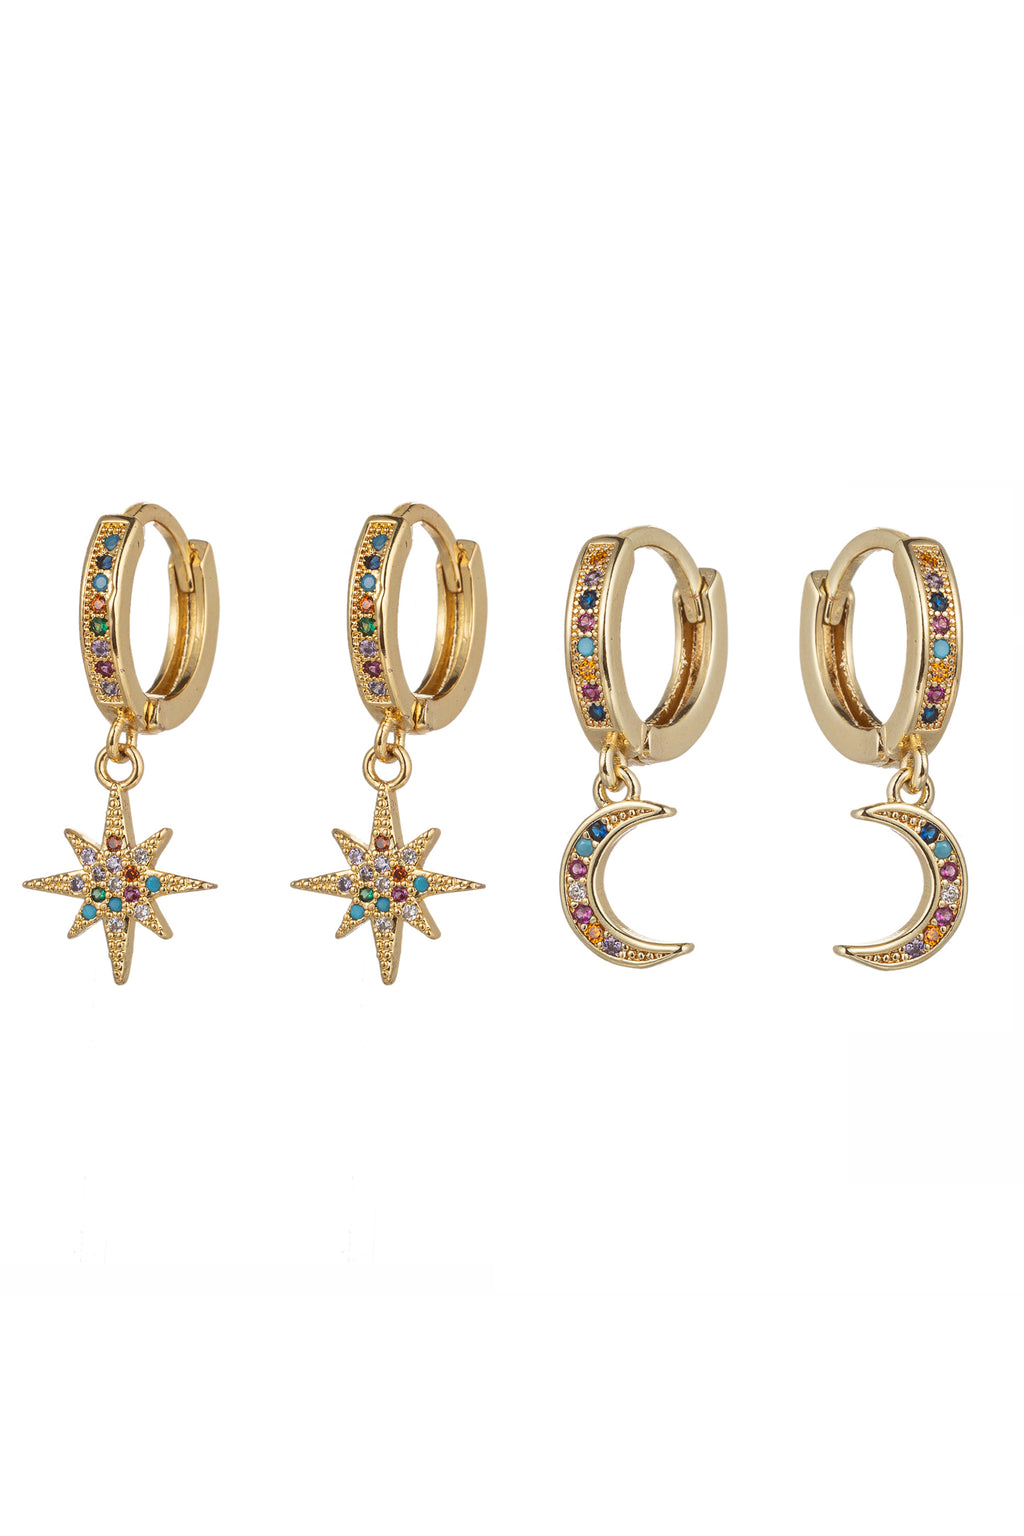 18k gold plated North Star and crescent moon earring set studded with CZ crystals.